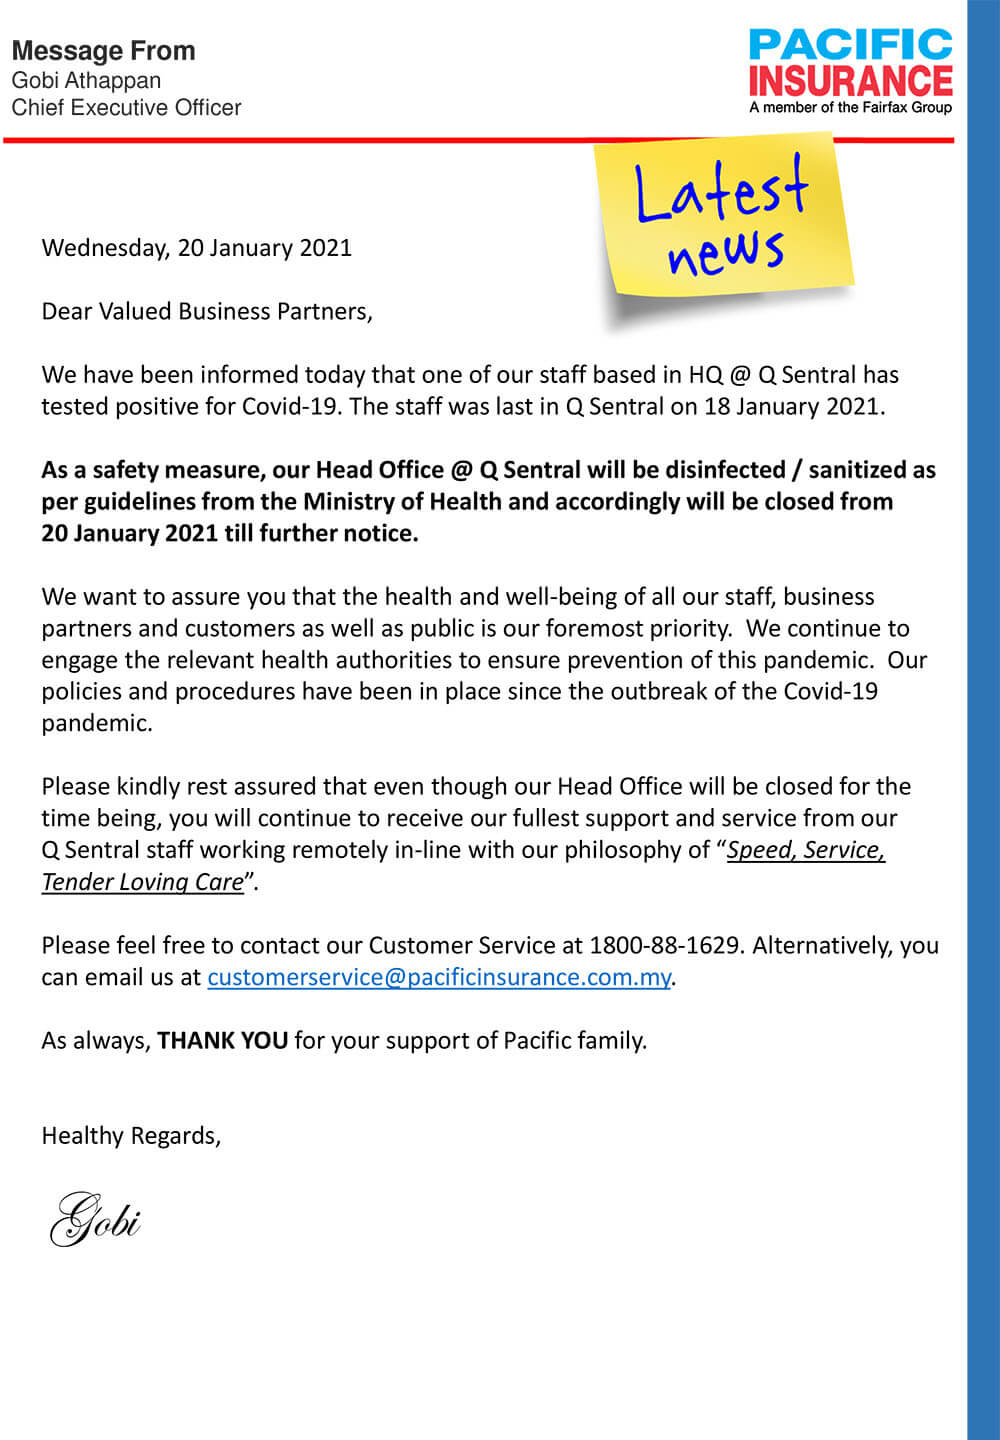 Temporary Closure of Branch Office @ Head Office, Q Sentral